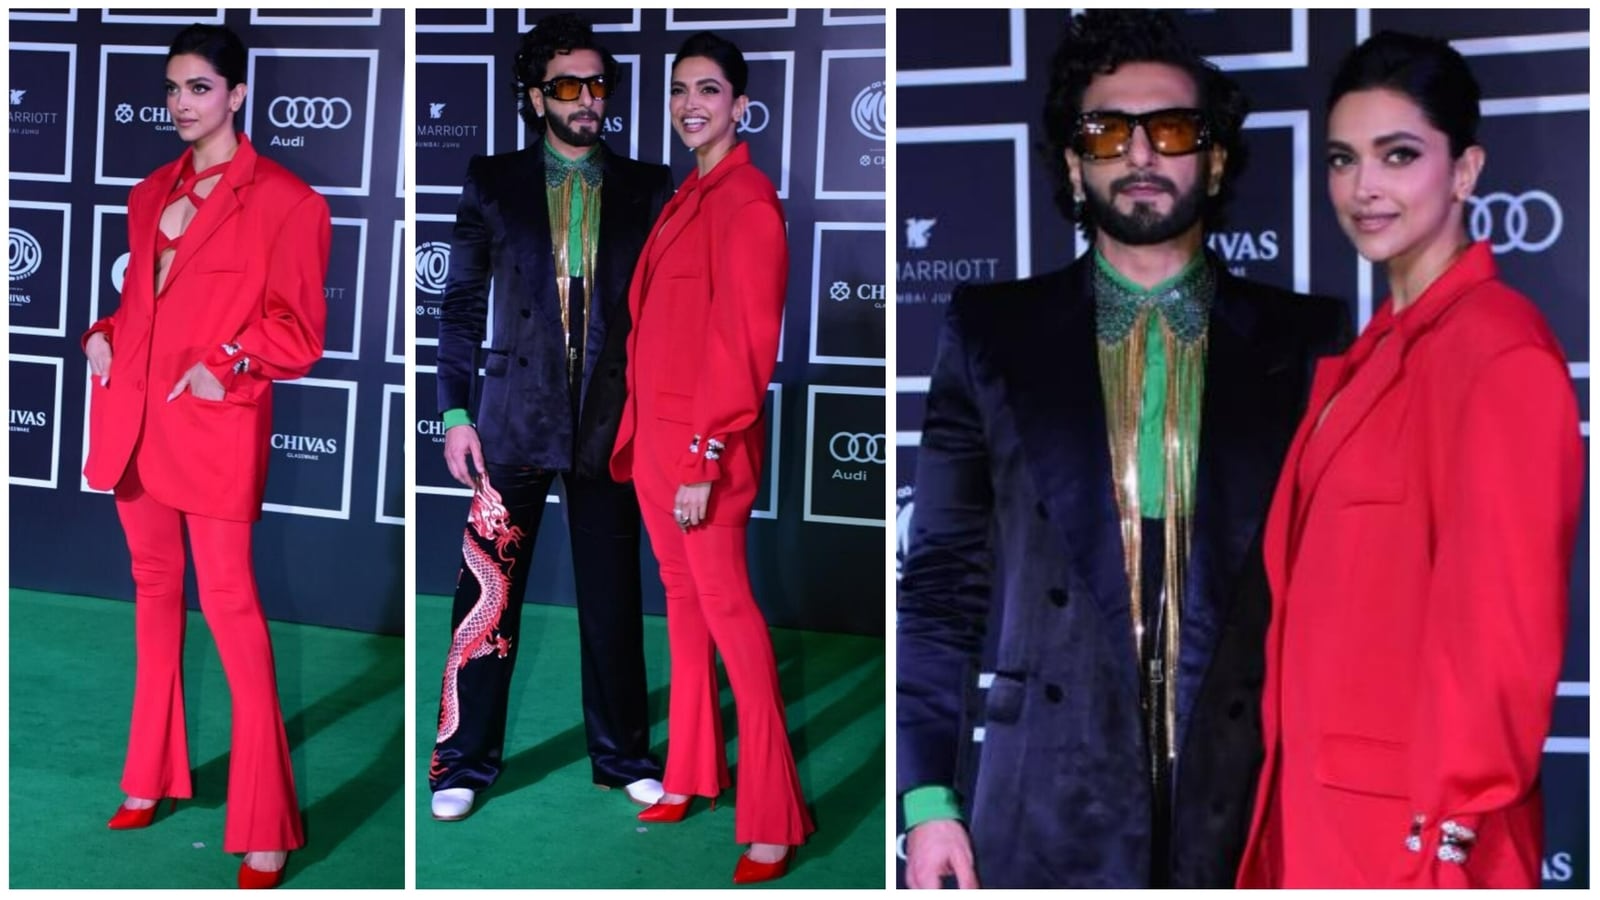 A deeper look at Ranveer Singh's statement style and love for logos